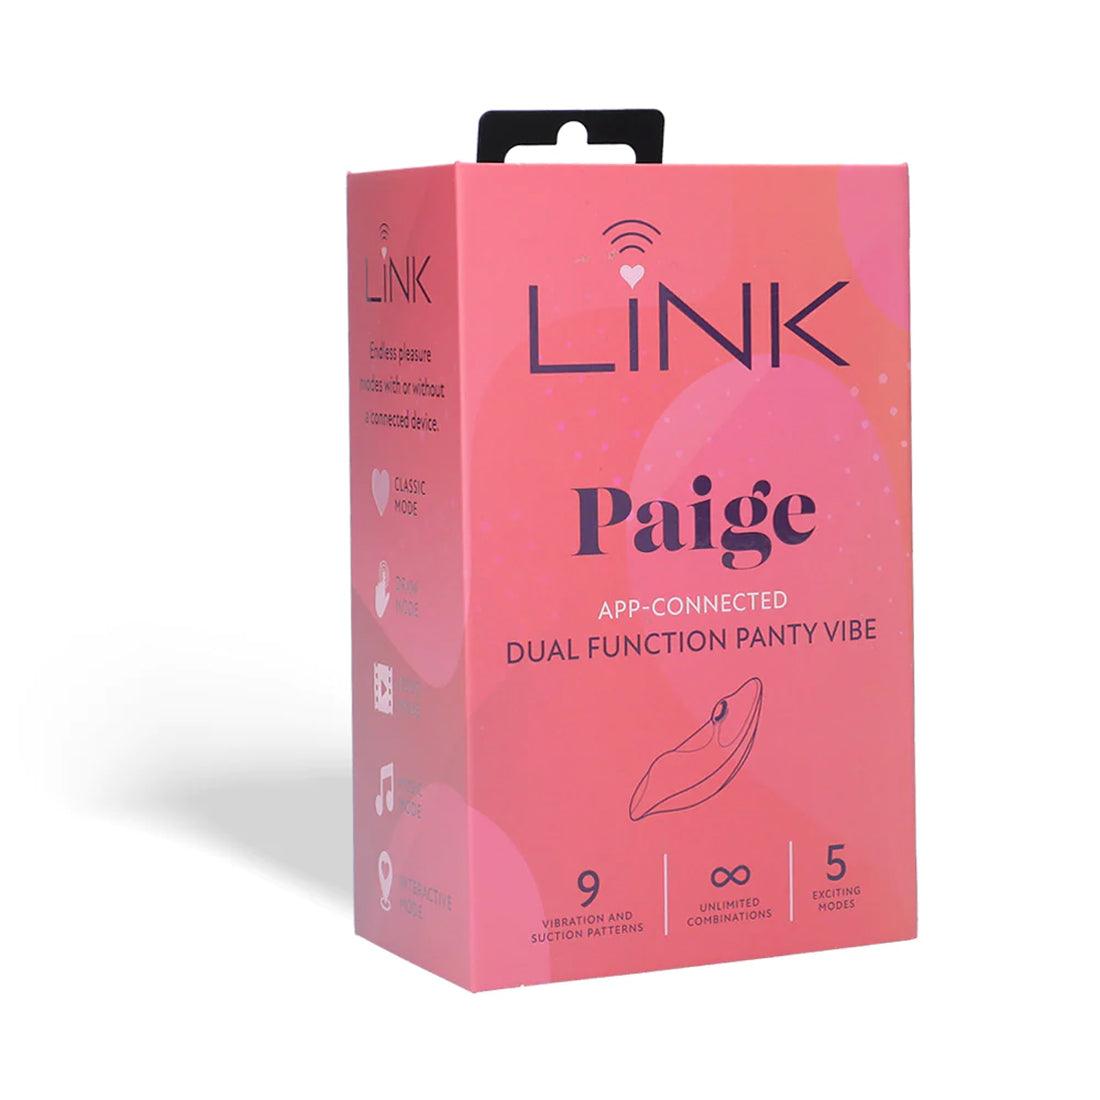 Link Paige - App Connected Dual Function Panty Vibe - Purple - My Sex Toy Hub